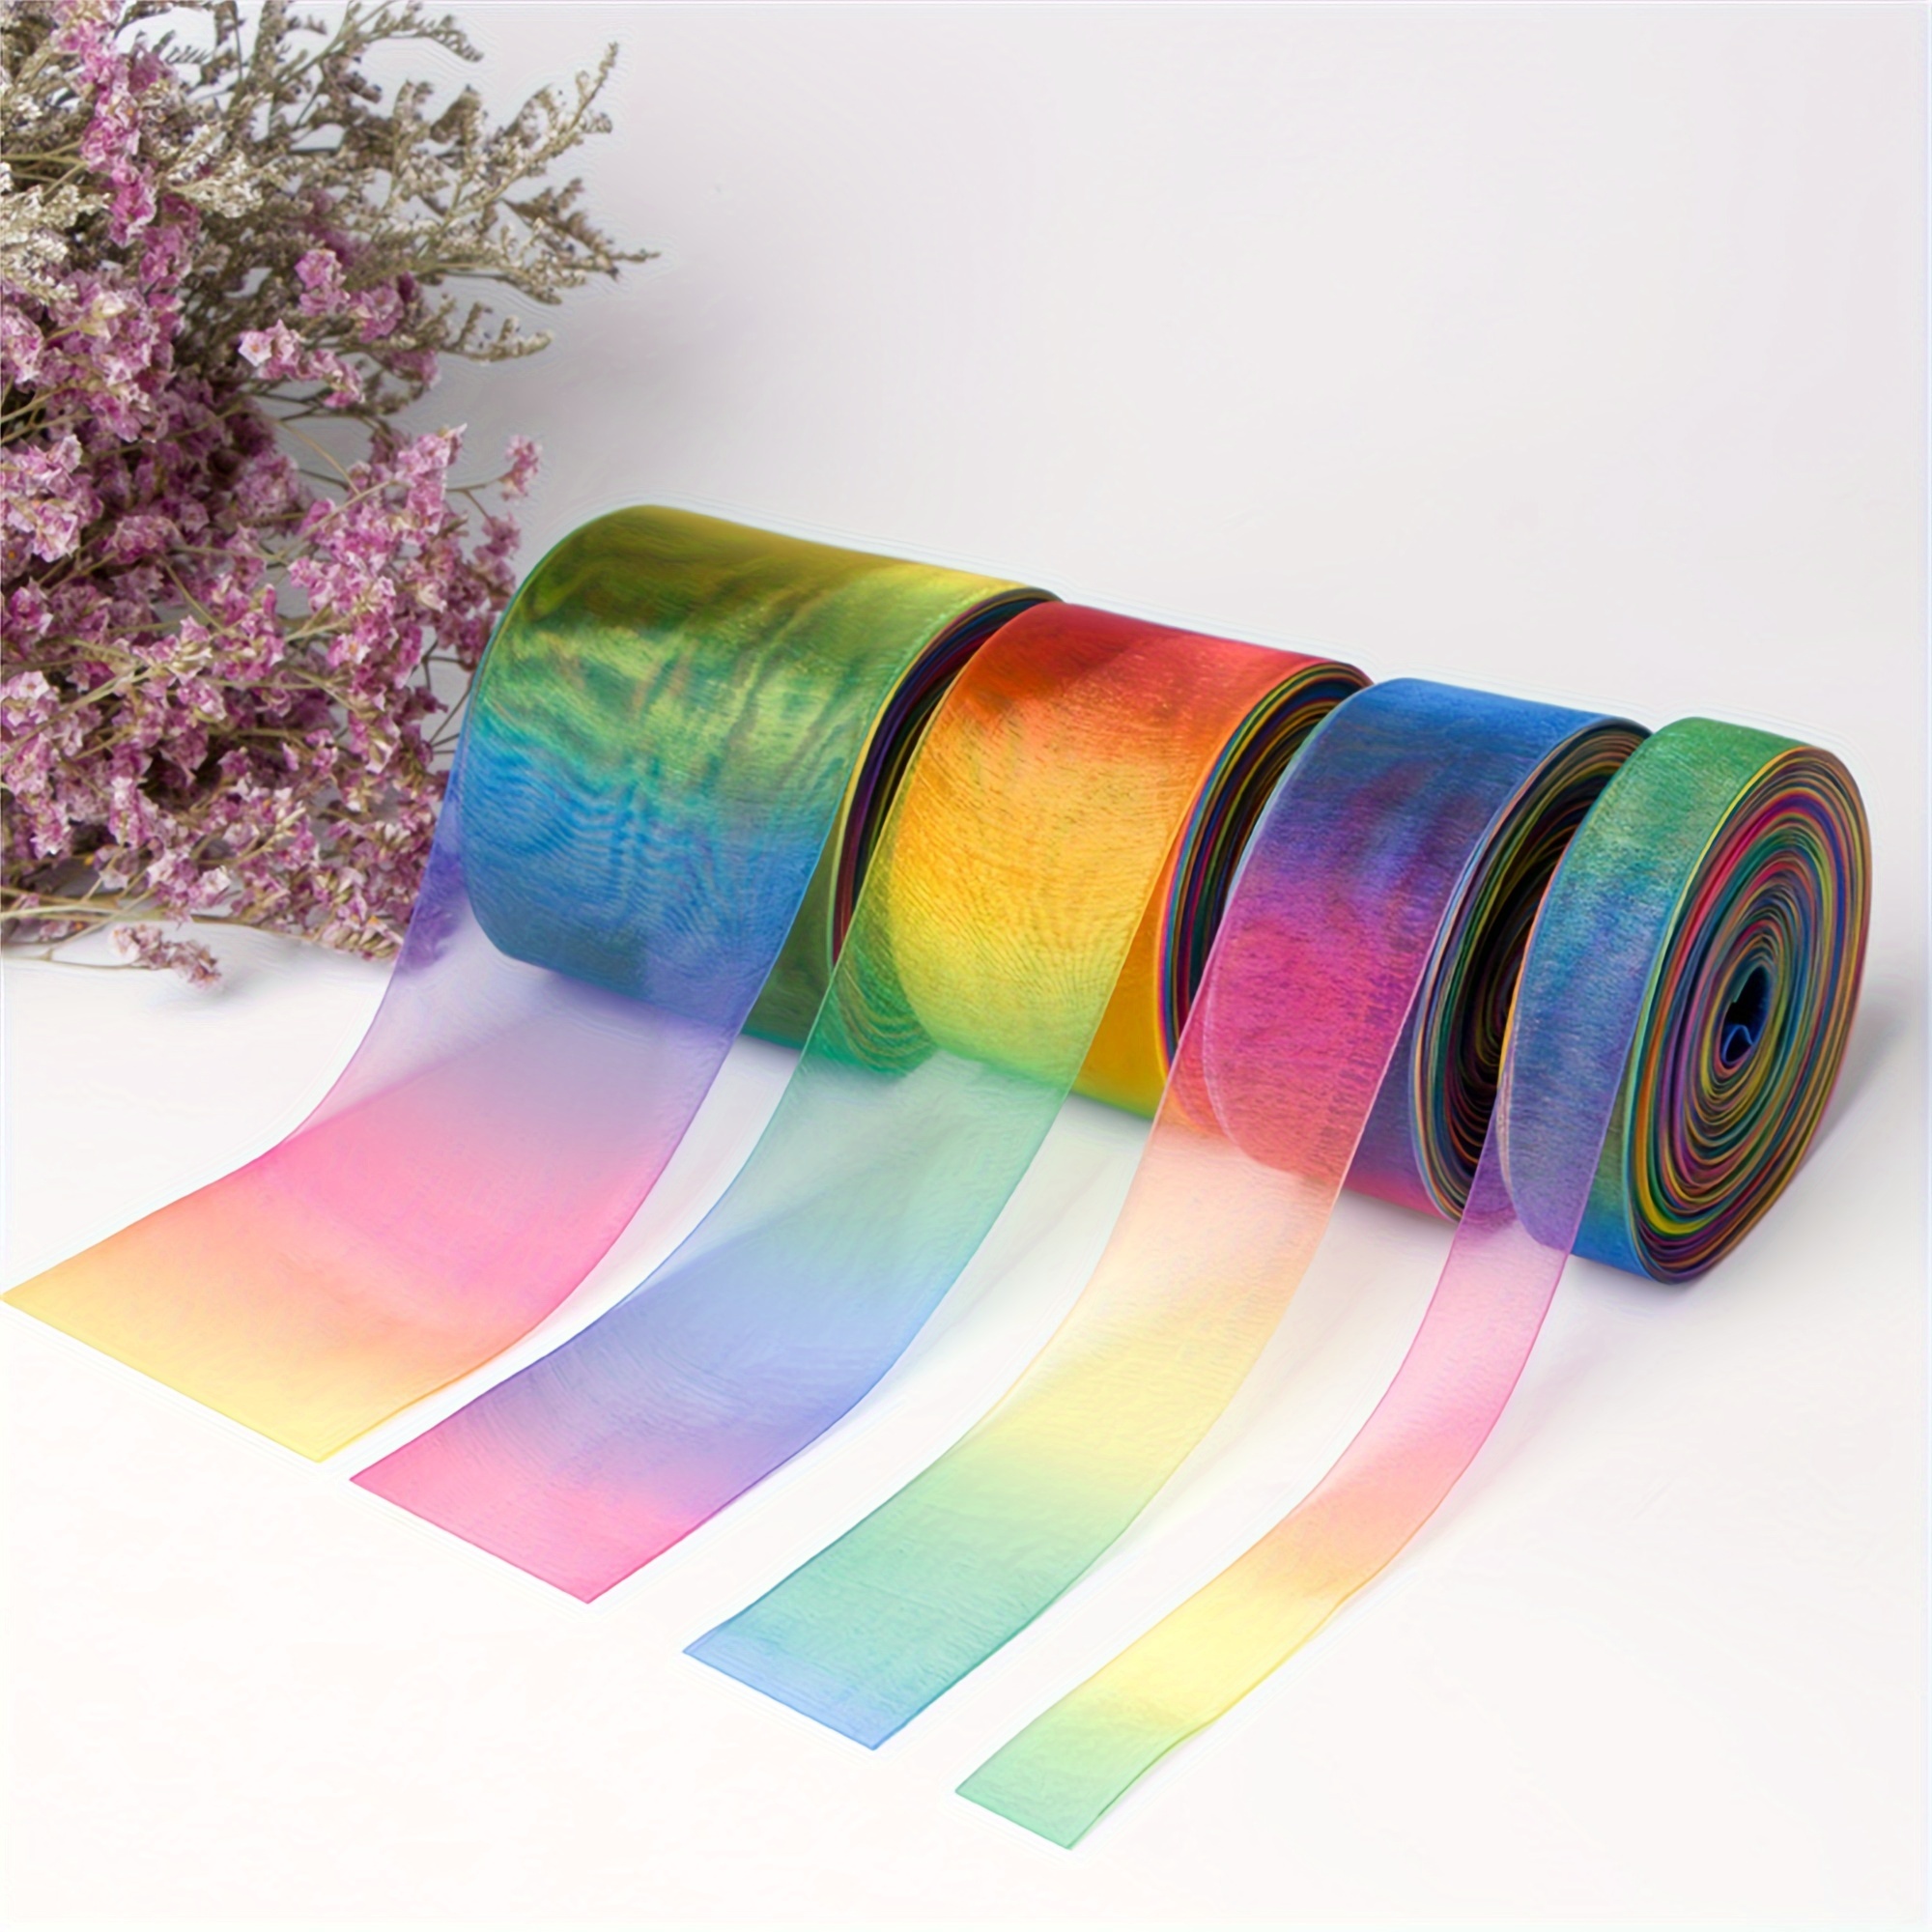 

1pc Rainbow Gradient Glitter Ribbon For Valentine's, Christmas, Wedding, Party Decorations, Gift Wrapping, Bouquet Ties, Diy Crafts & Handmade Flower Material